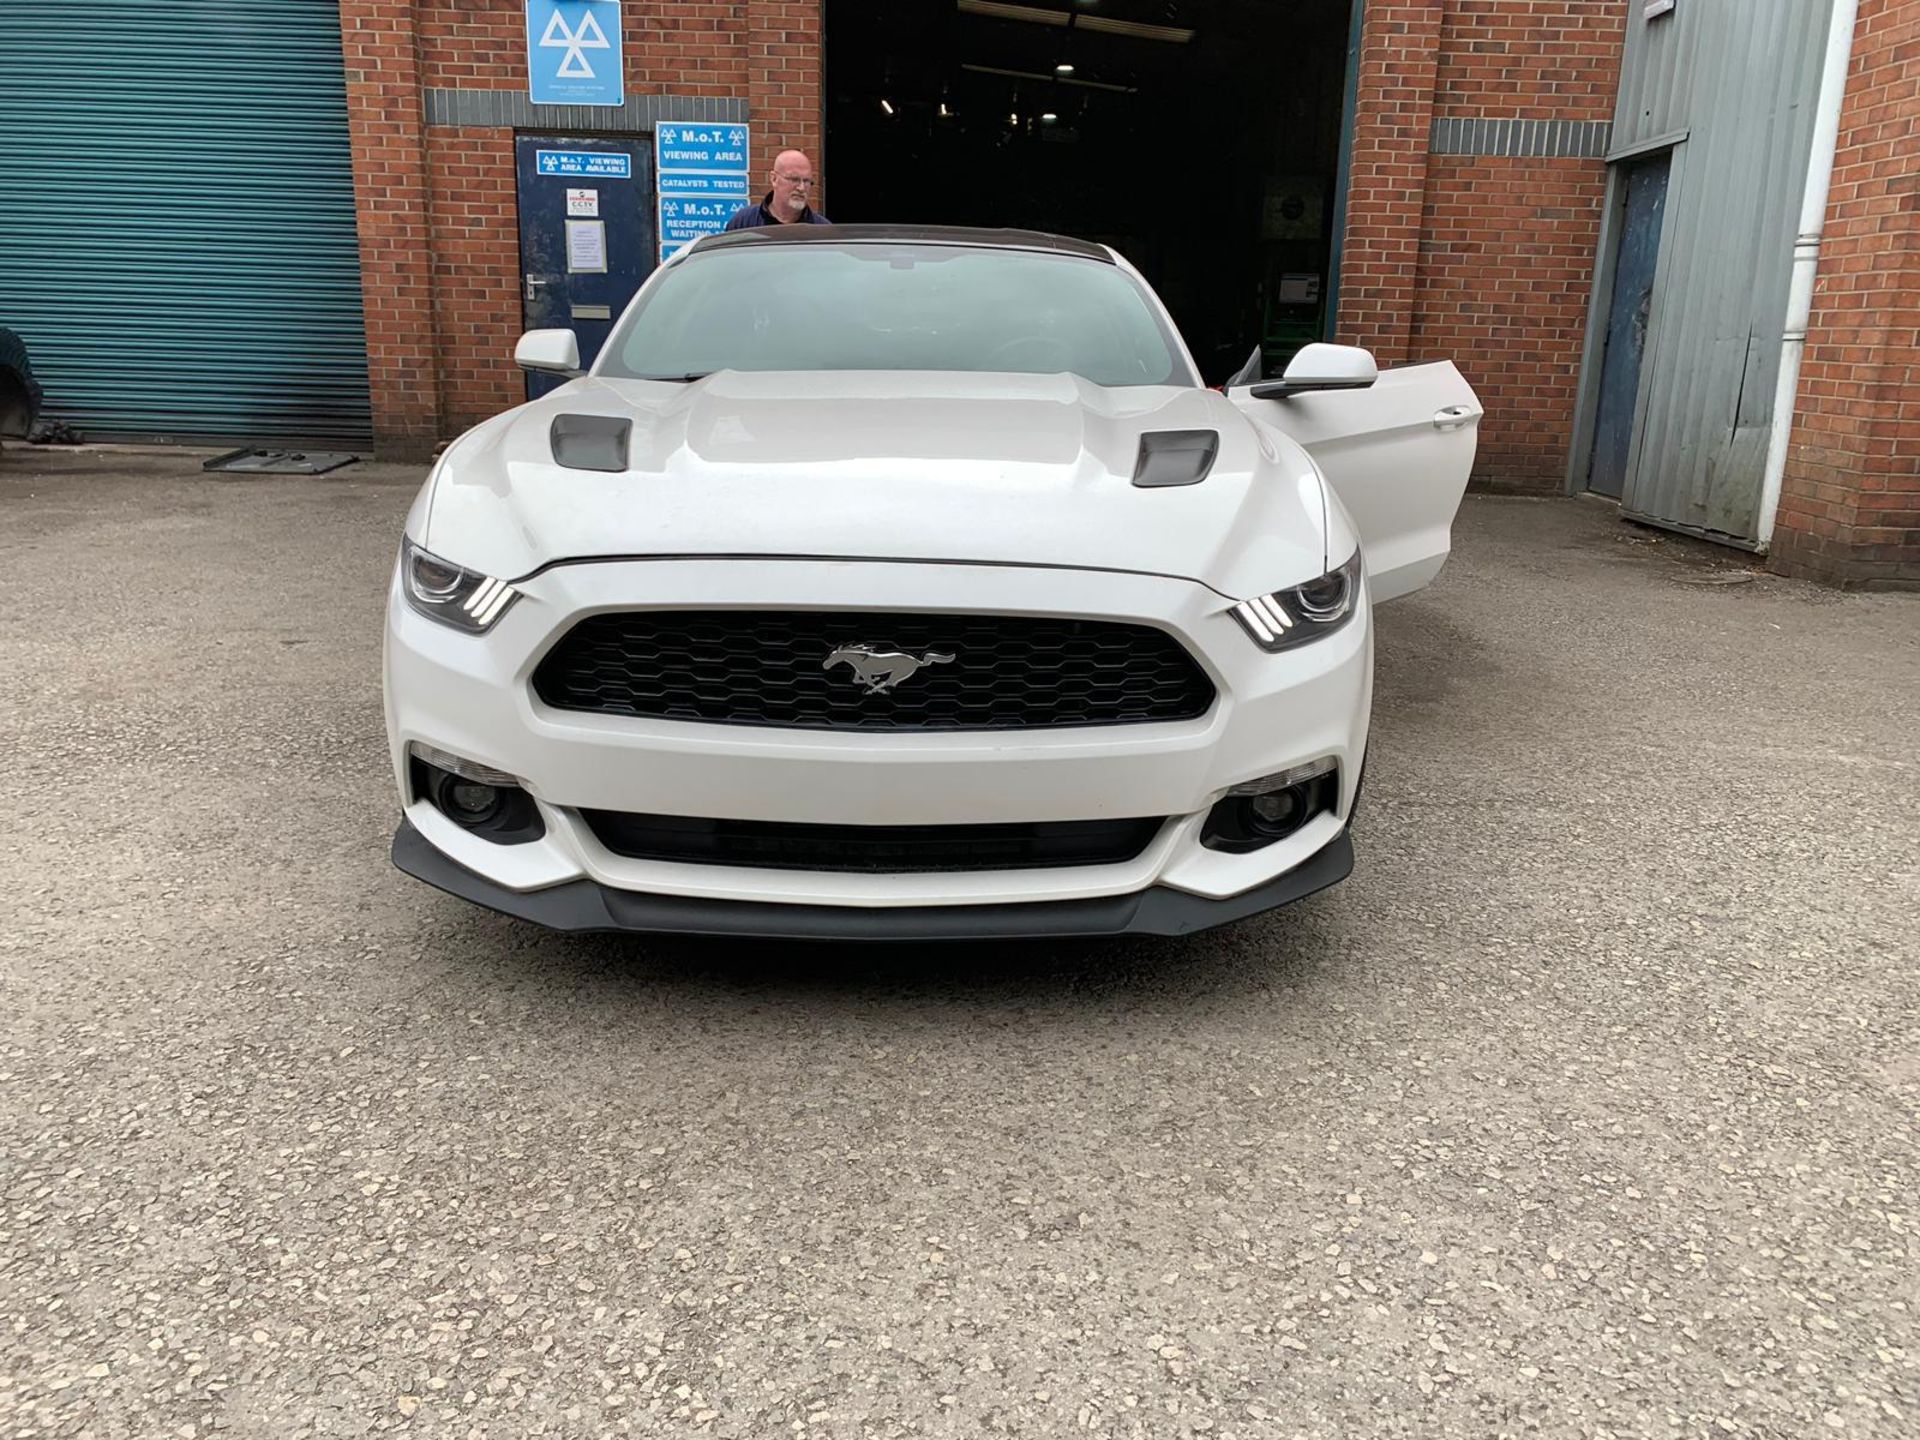 2018 MUSTANG 5.0 GT C8 MANUAL GEAR 15,000 MILES LEFT HAND DRIVE SOLD WITH NOVA *NO VAT* - Image 2 of 8